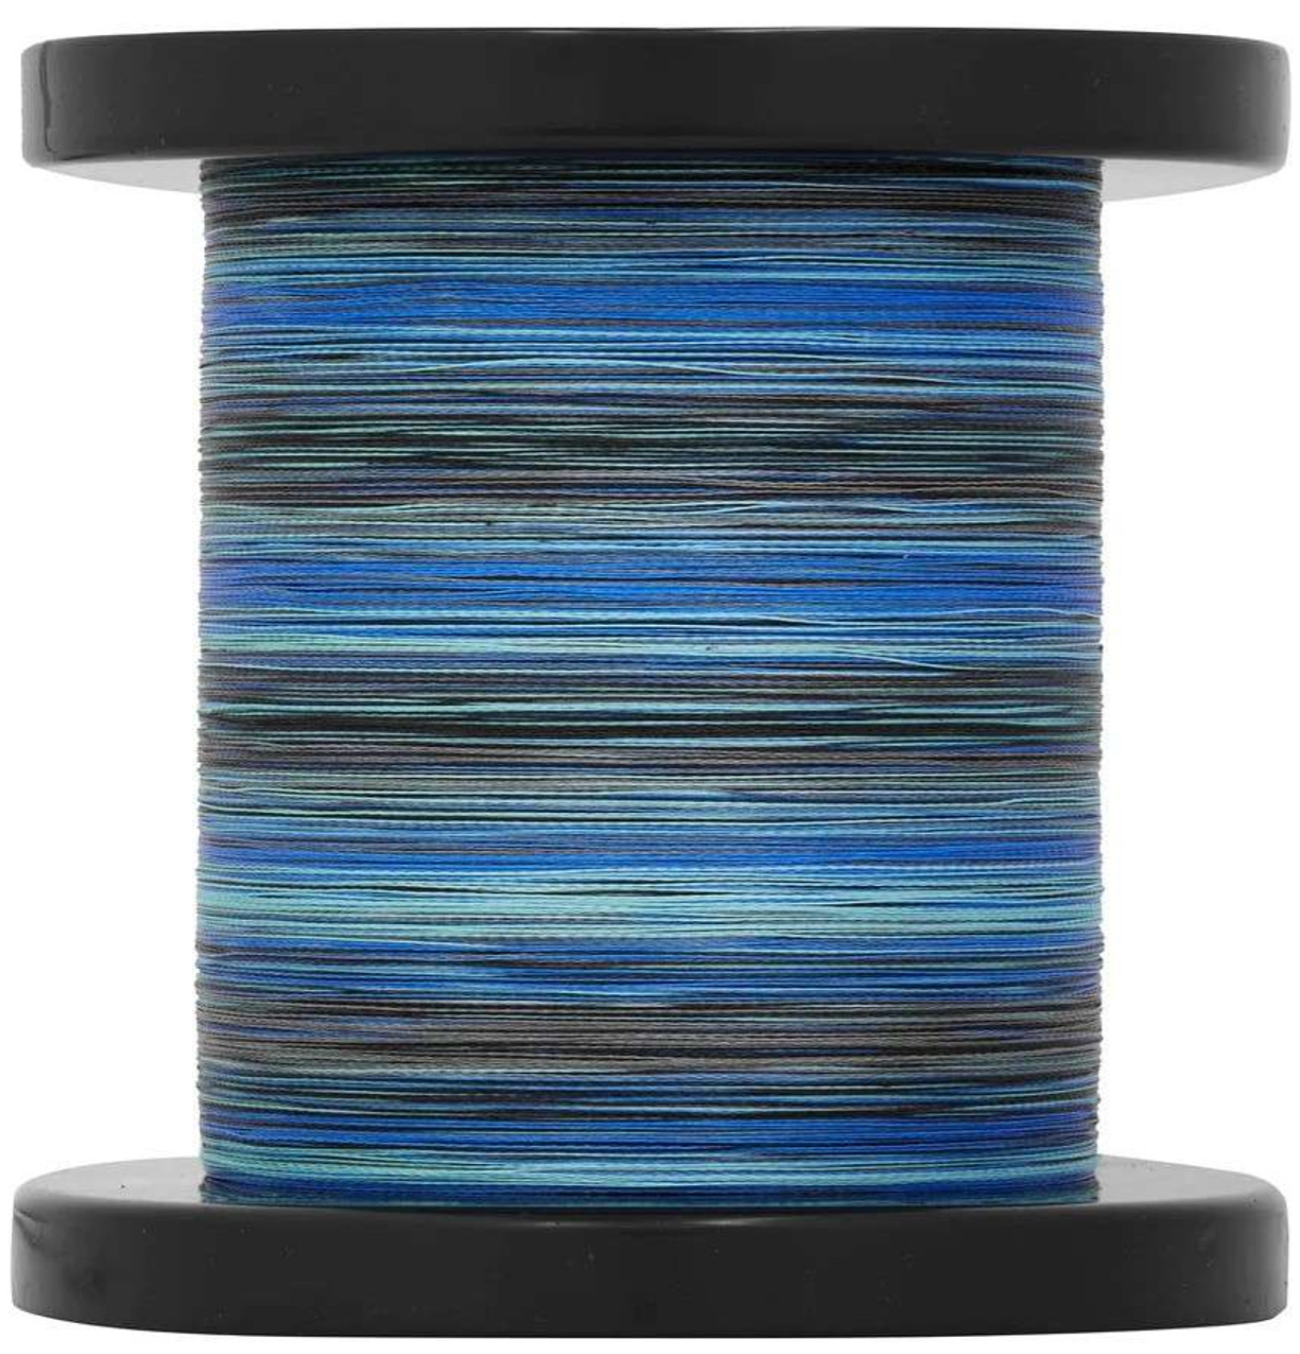 FREGITO 8 Strands Braided Fishing Line - Super Pull Zero Stretch Braided  Lines - Abrasion Resistant - 100% Pe Fishing Line 328Yds - 20 LB to 52 LB  Yellow Color : : Sports, Fitness & Outdoors